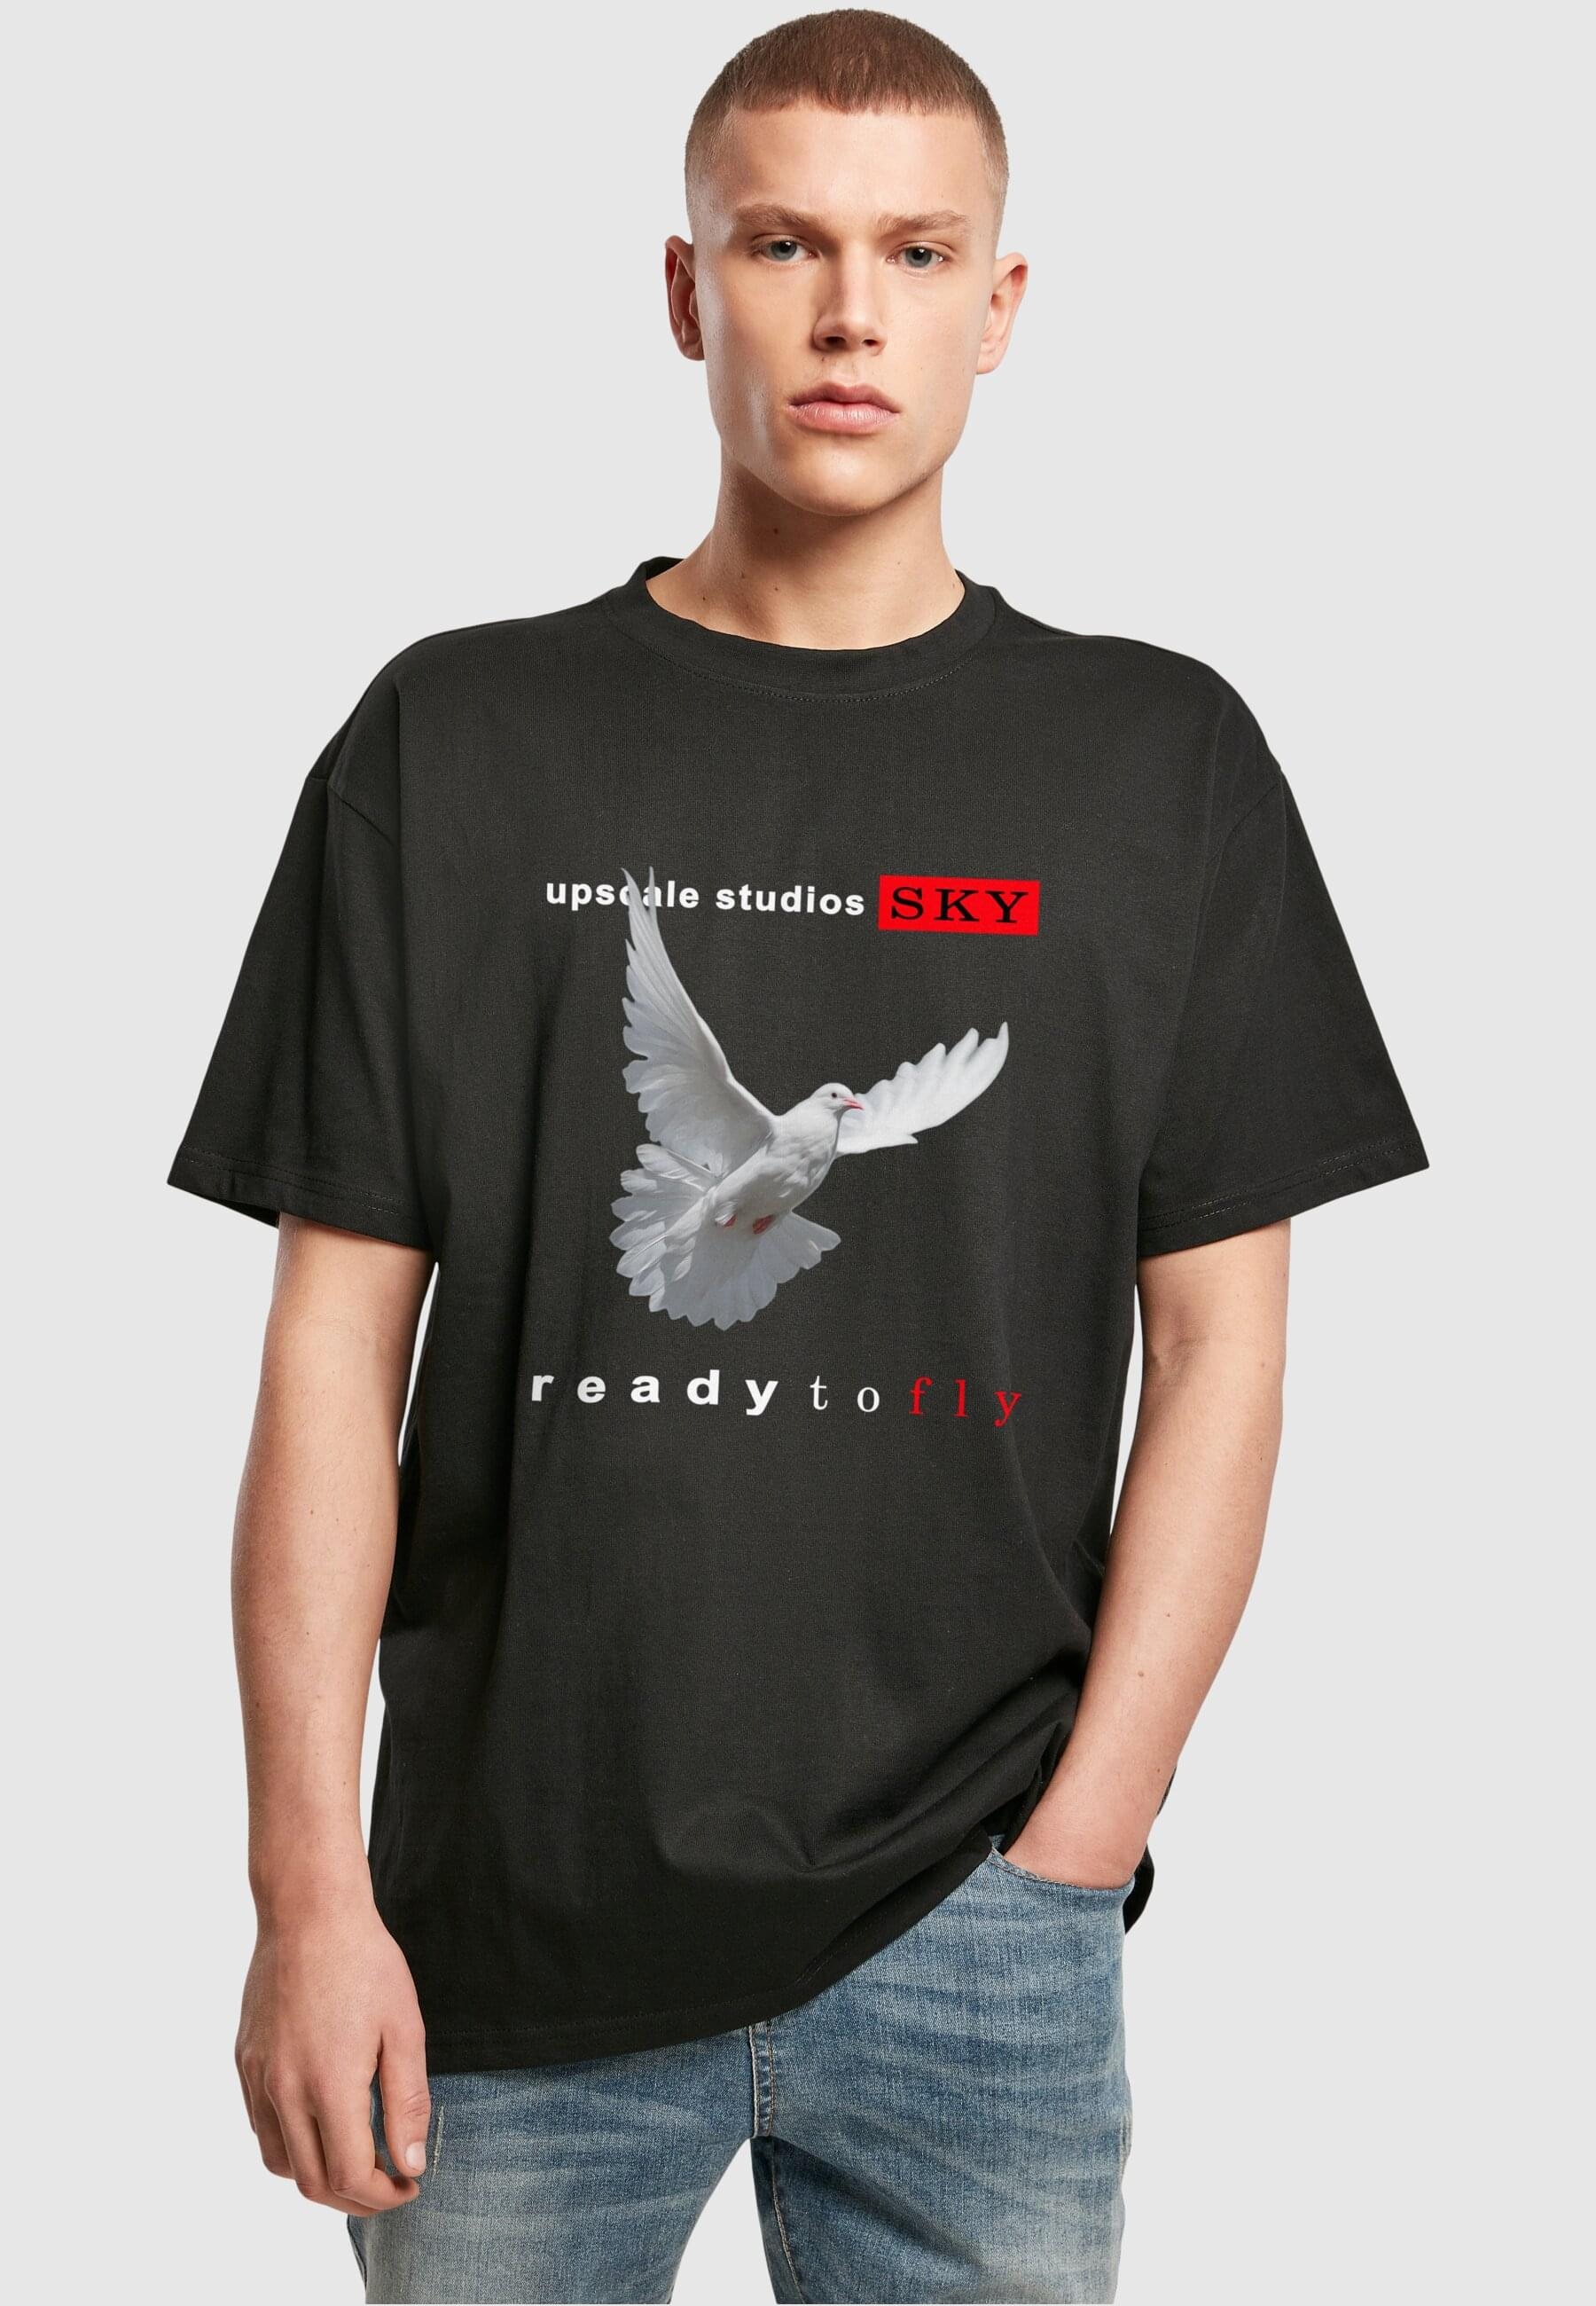 Upscale by Mister to kaufen (1 T-Shirt Tee«, ▷ Ready BAUR tlg.) »Unisex Oversize fly | Tee